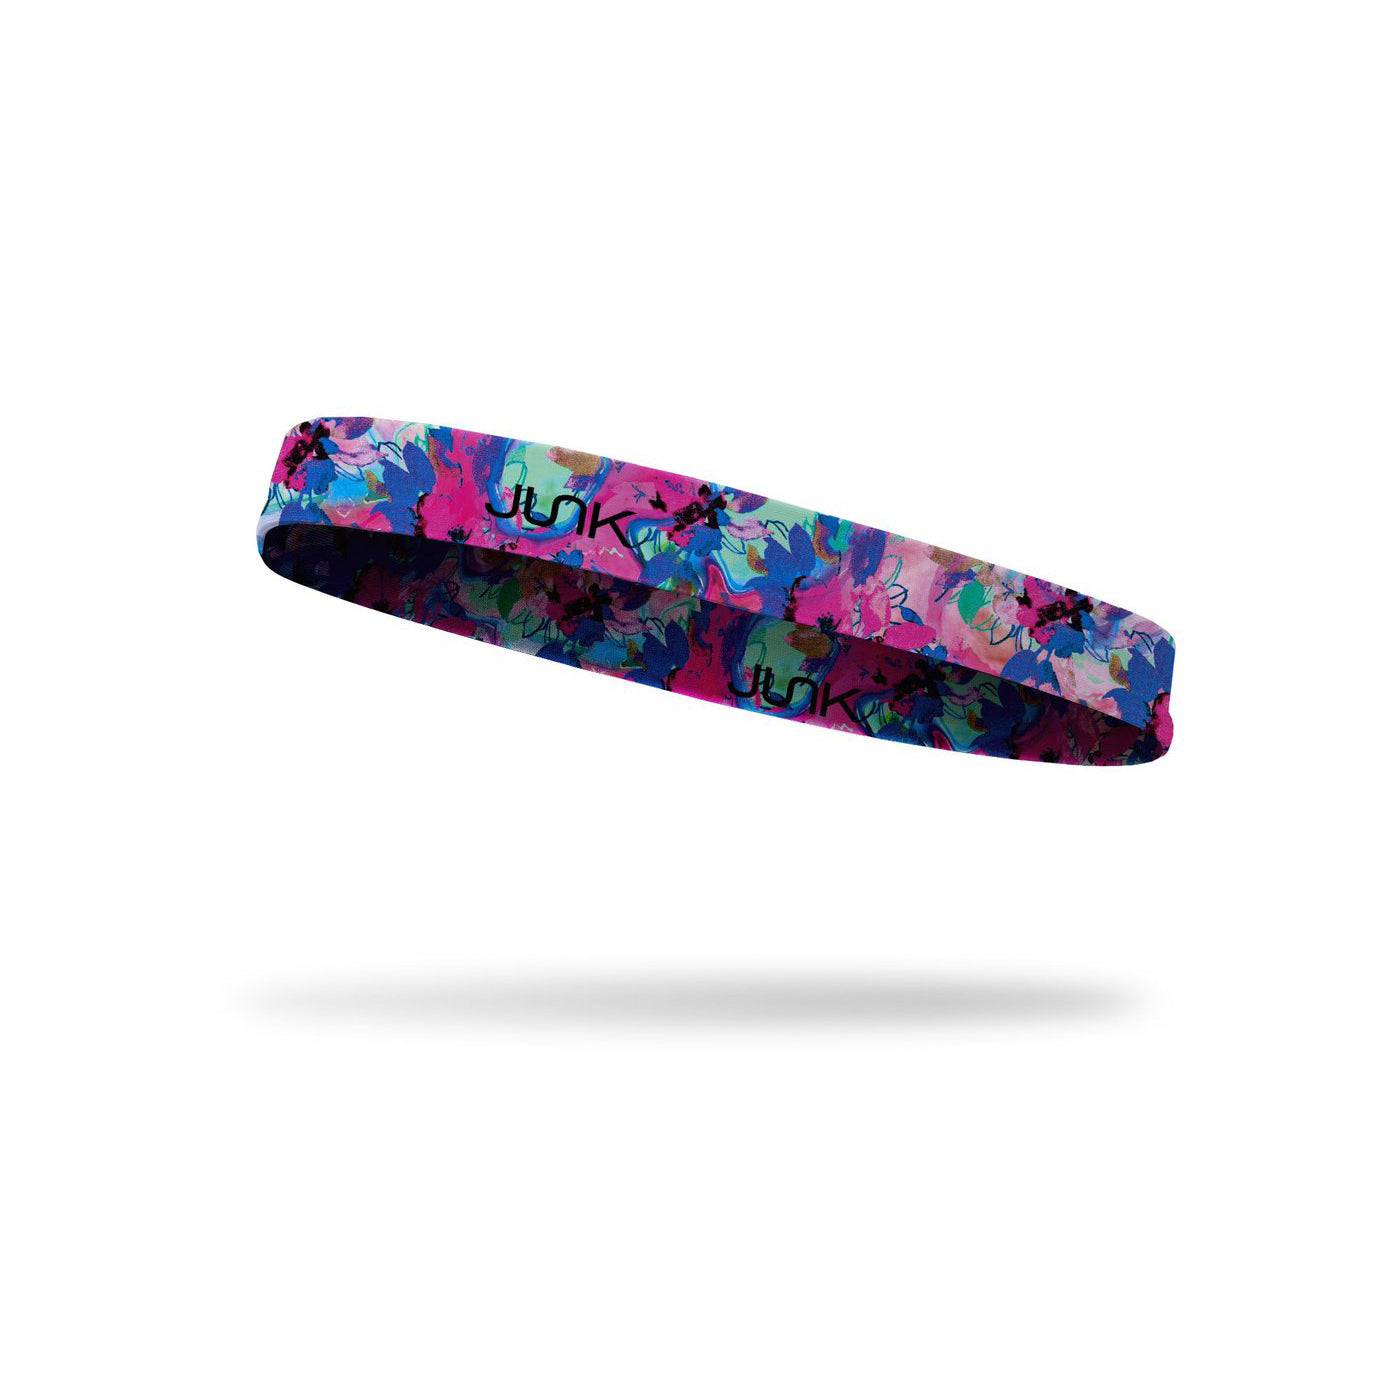 JUNK Chilling Bloom Headband (Thin Band) - 9 for 9